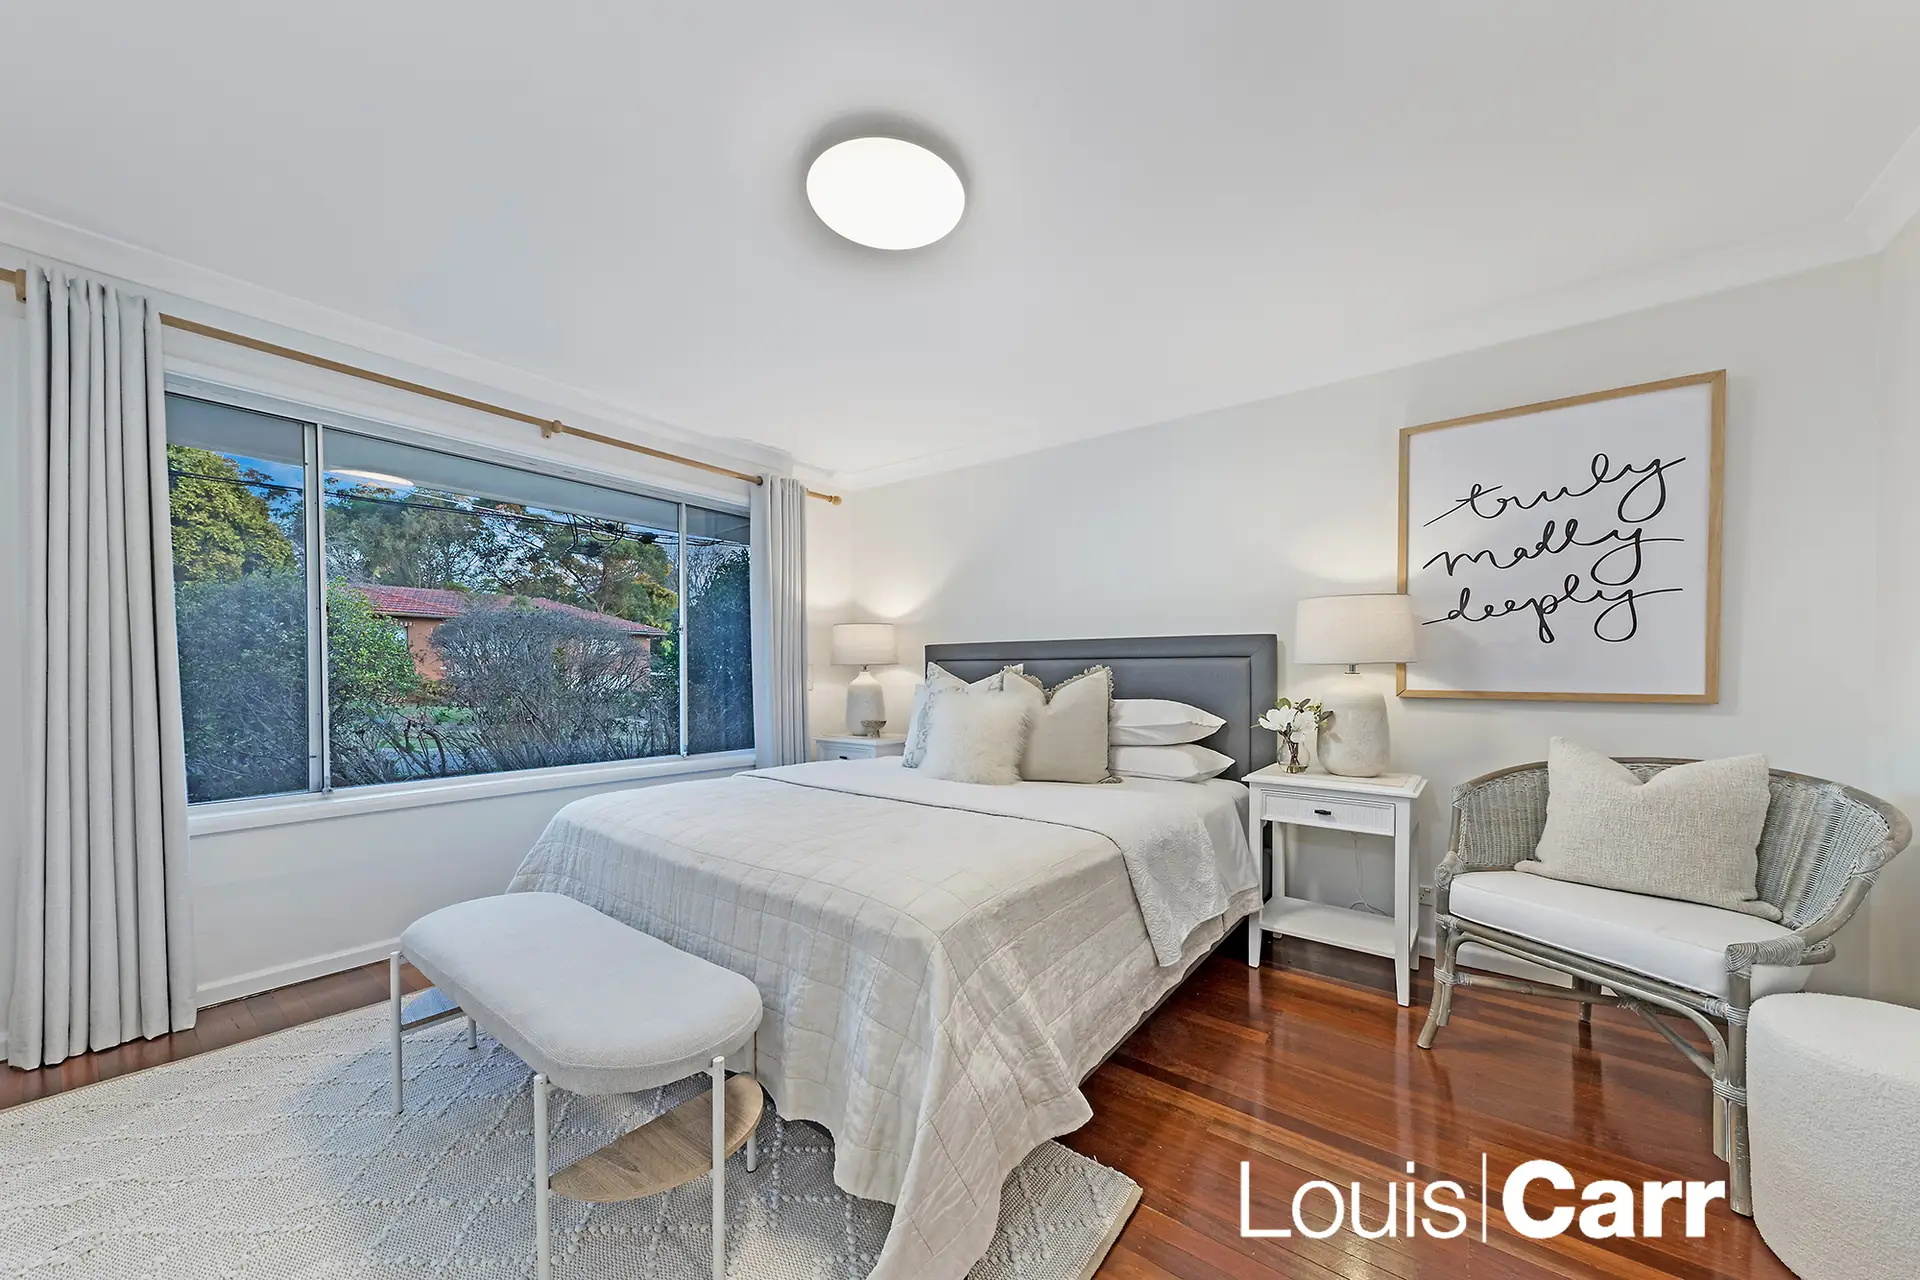 Photo #14: 4 Valda Street, West Pennant Hills - Sold by Louis Carr Real Estate